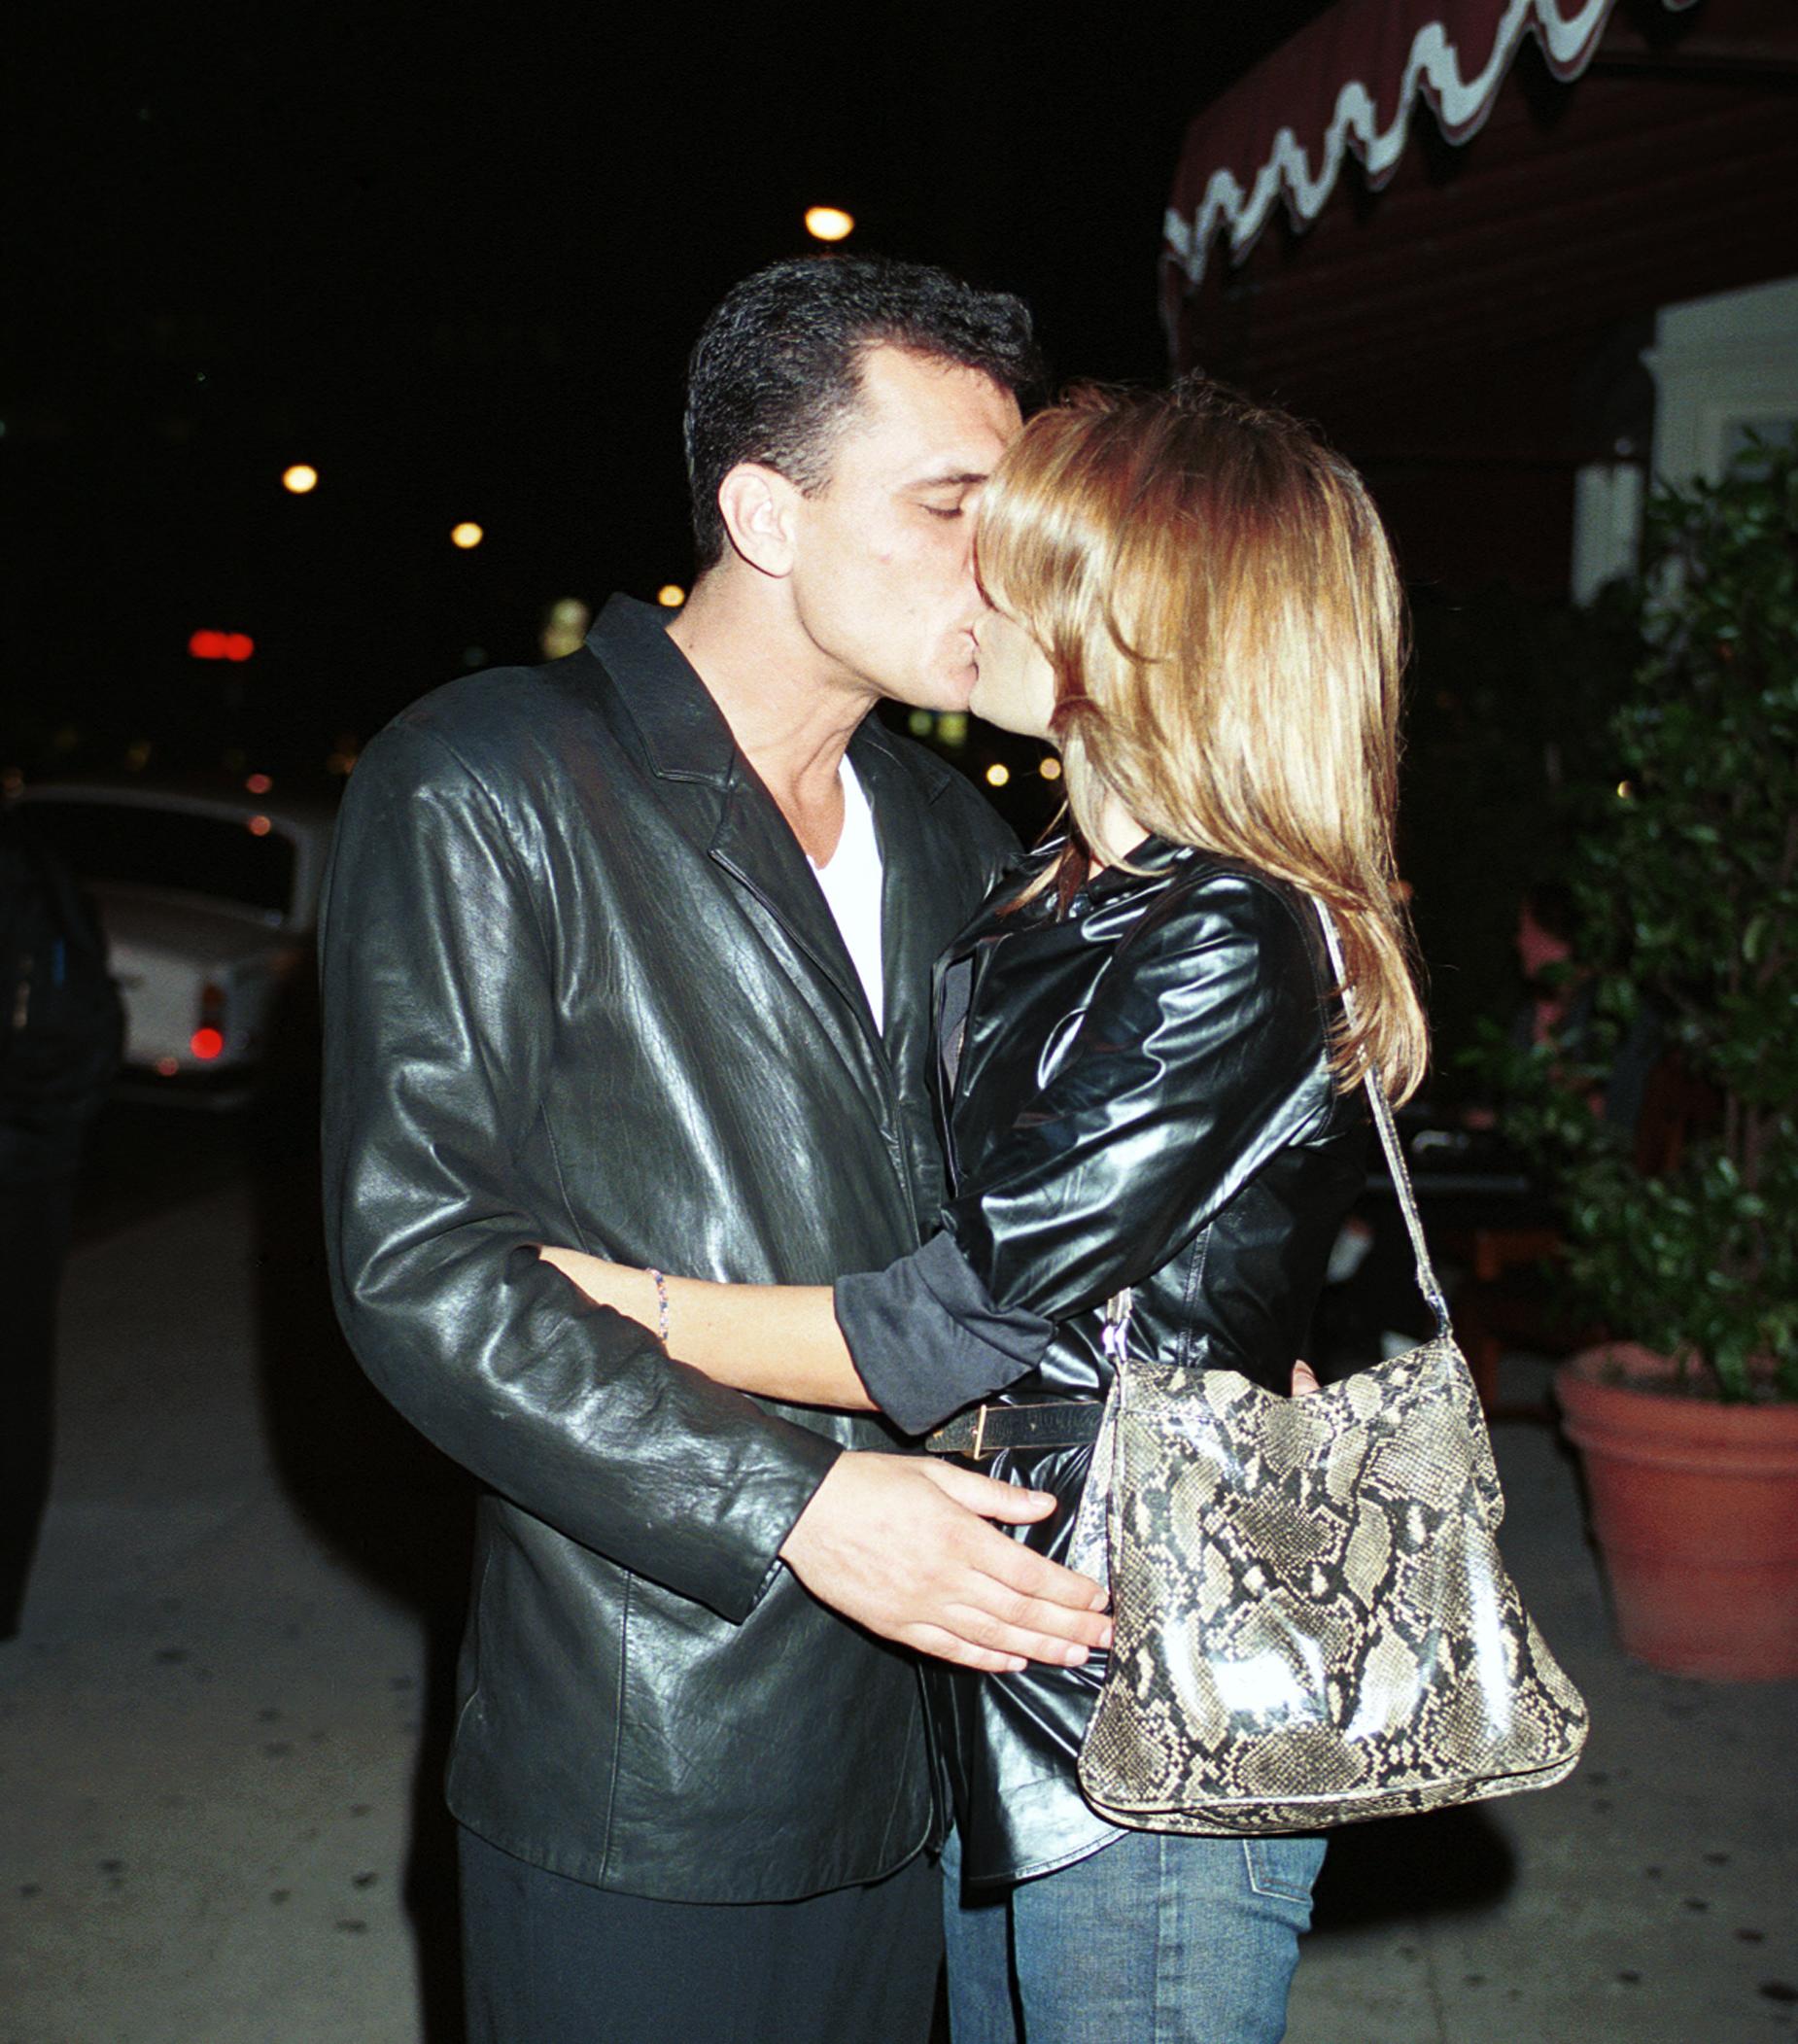 Tahnee Welch Plants A Kiss On Her Boyfriend Luca Palanca Outside Of The Atlantic Restaurant. | Source: Getty Images